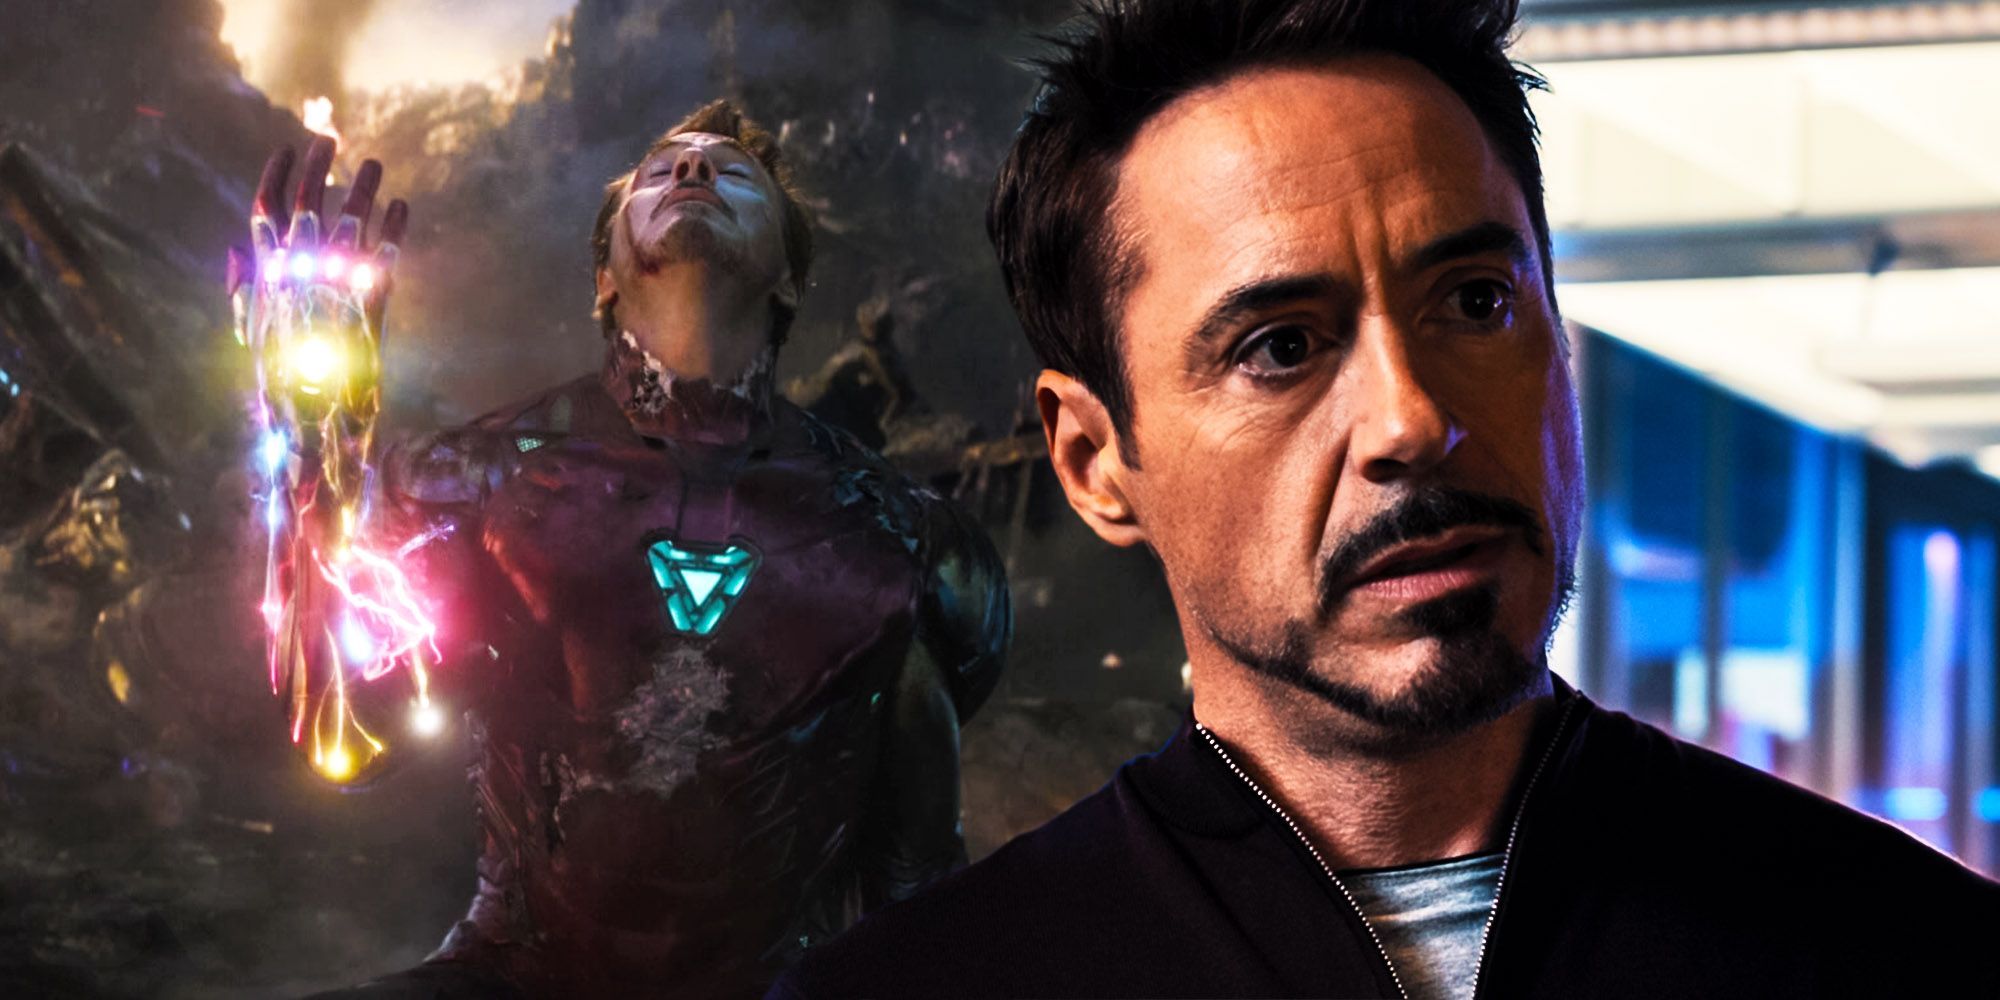 Iron man in Avengers endgame and age of ultron